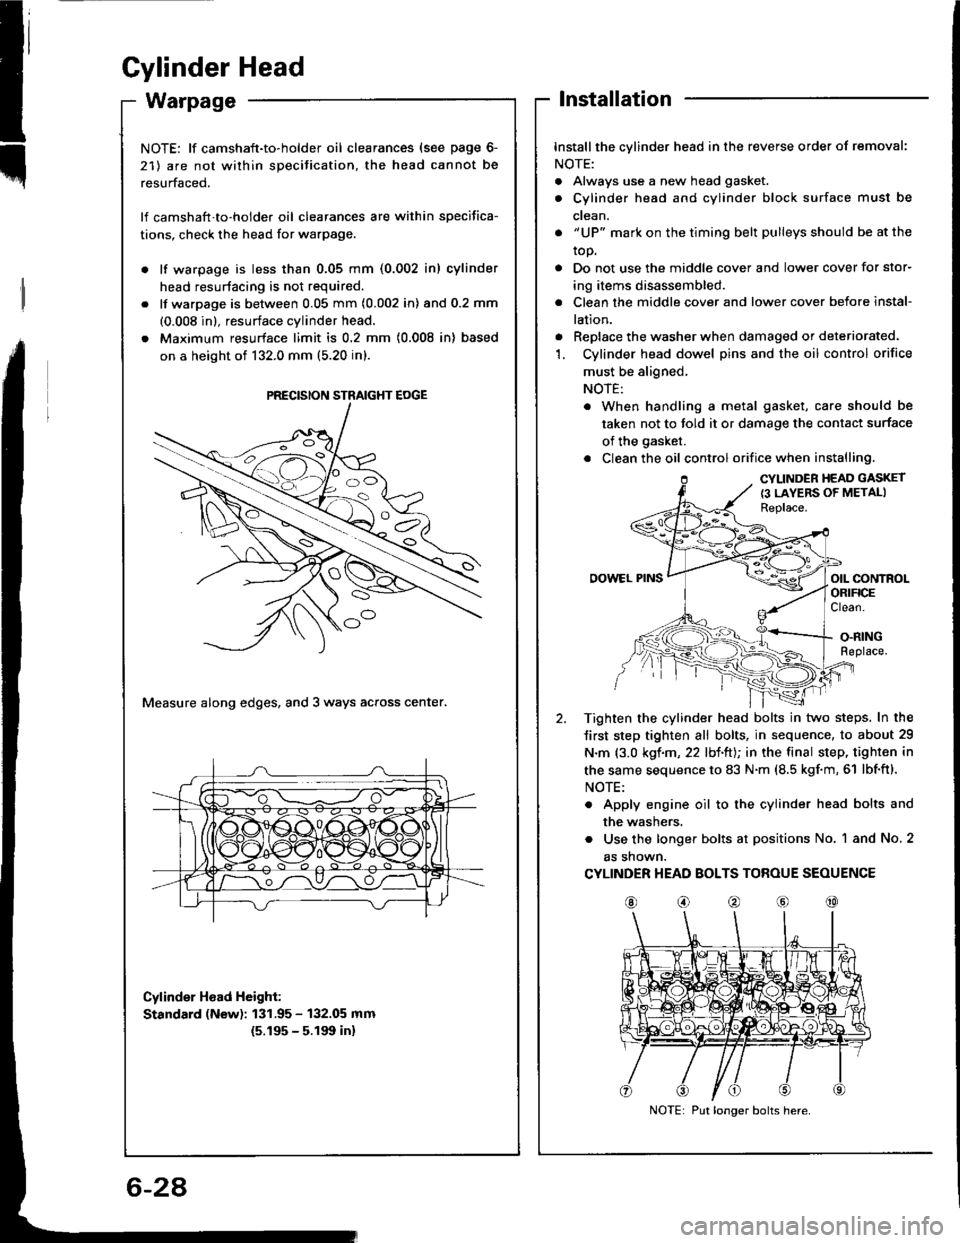 HONDA INTEGRA 1994 4.G Workshop Manual t
Gylinder Head
Installation
Installthe cylinder head in the reverse order of removal:
NOTE:
. Always use a new head gasket.
. Cylinder head and cylinder block surface must be
ctean.
. "UP" mark on th